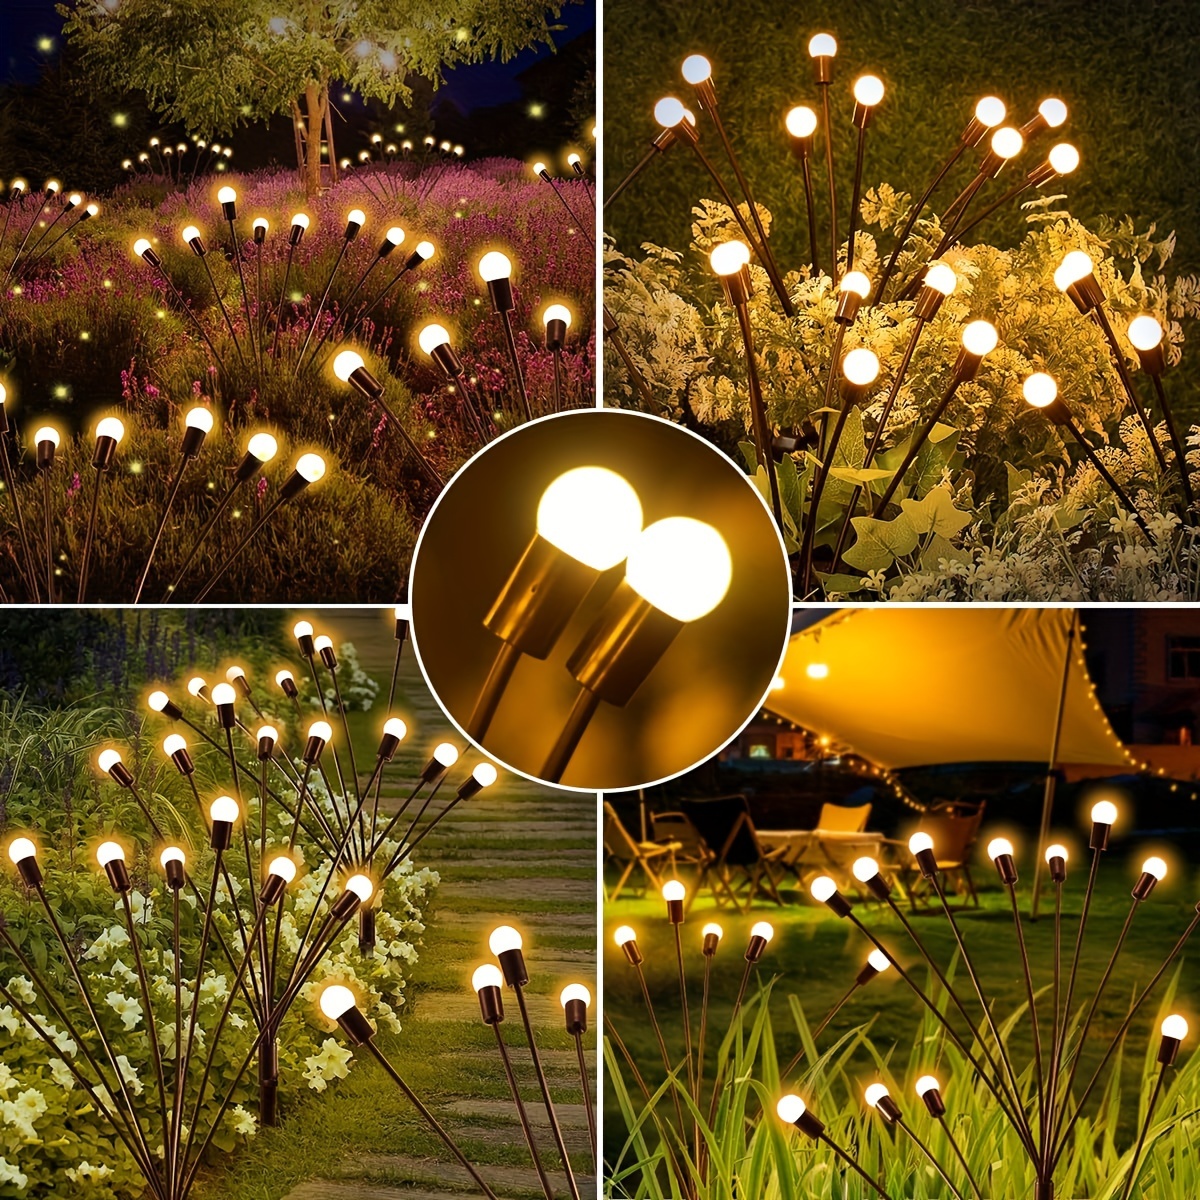 

8pcs Outdoor, Upgraded 64 Led Firefly Solar Lights For Outside, By Wind, Solar Powered Outdoor Lights For Yard Garden Decor Party Xmas Decorations (warm White)